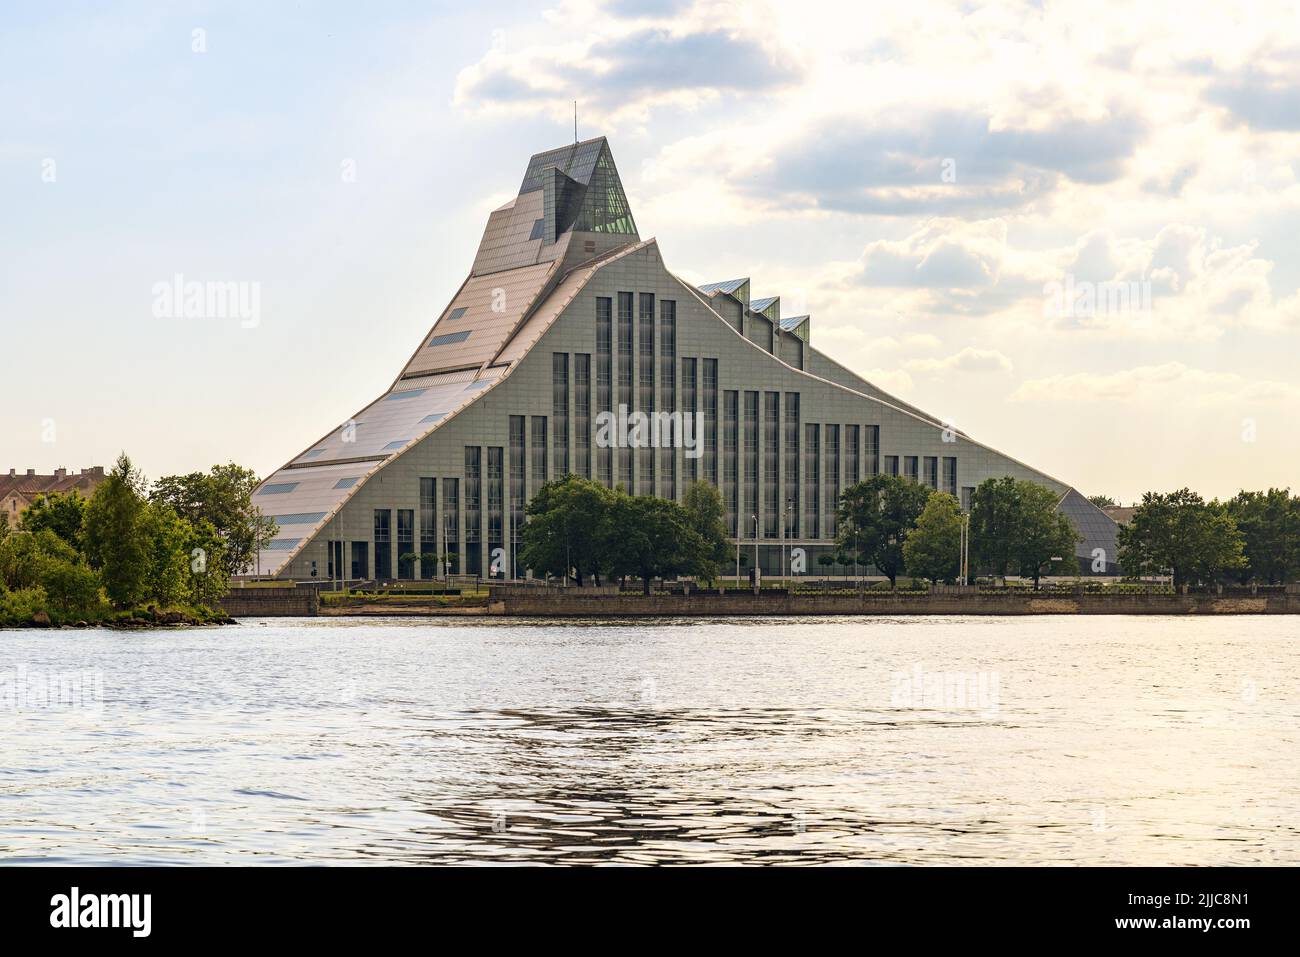 Main building of the National Library of Latvia, known as the Castle of Light, opened 2014, on the Daugava River, Riga Latvia Europe. Stock Photo